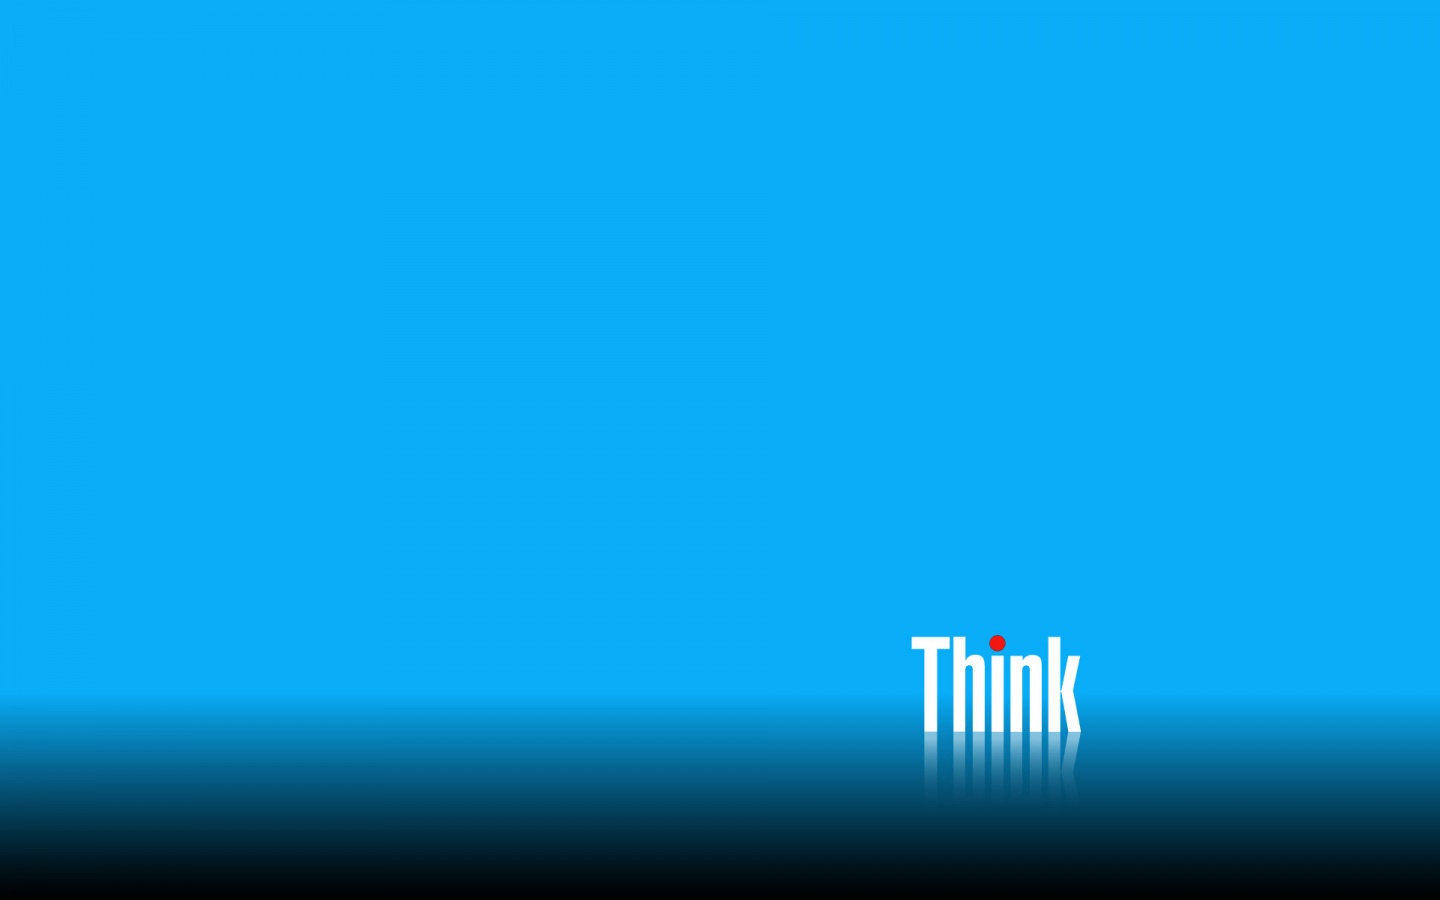 Related Pictures ibm thinkpad wallpaper free wallpaper download